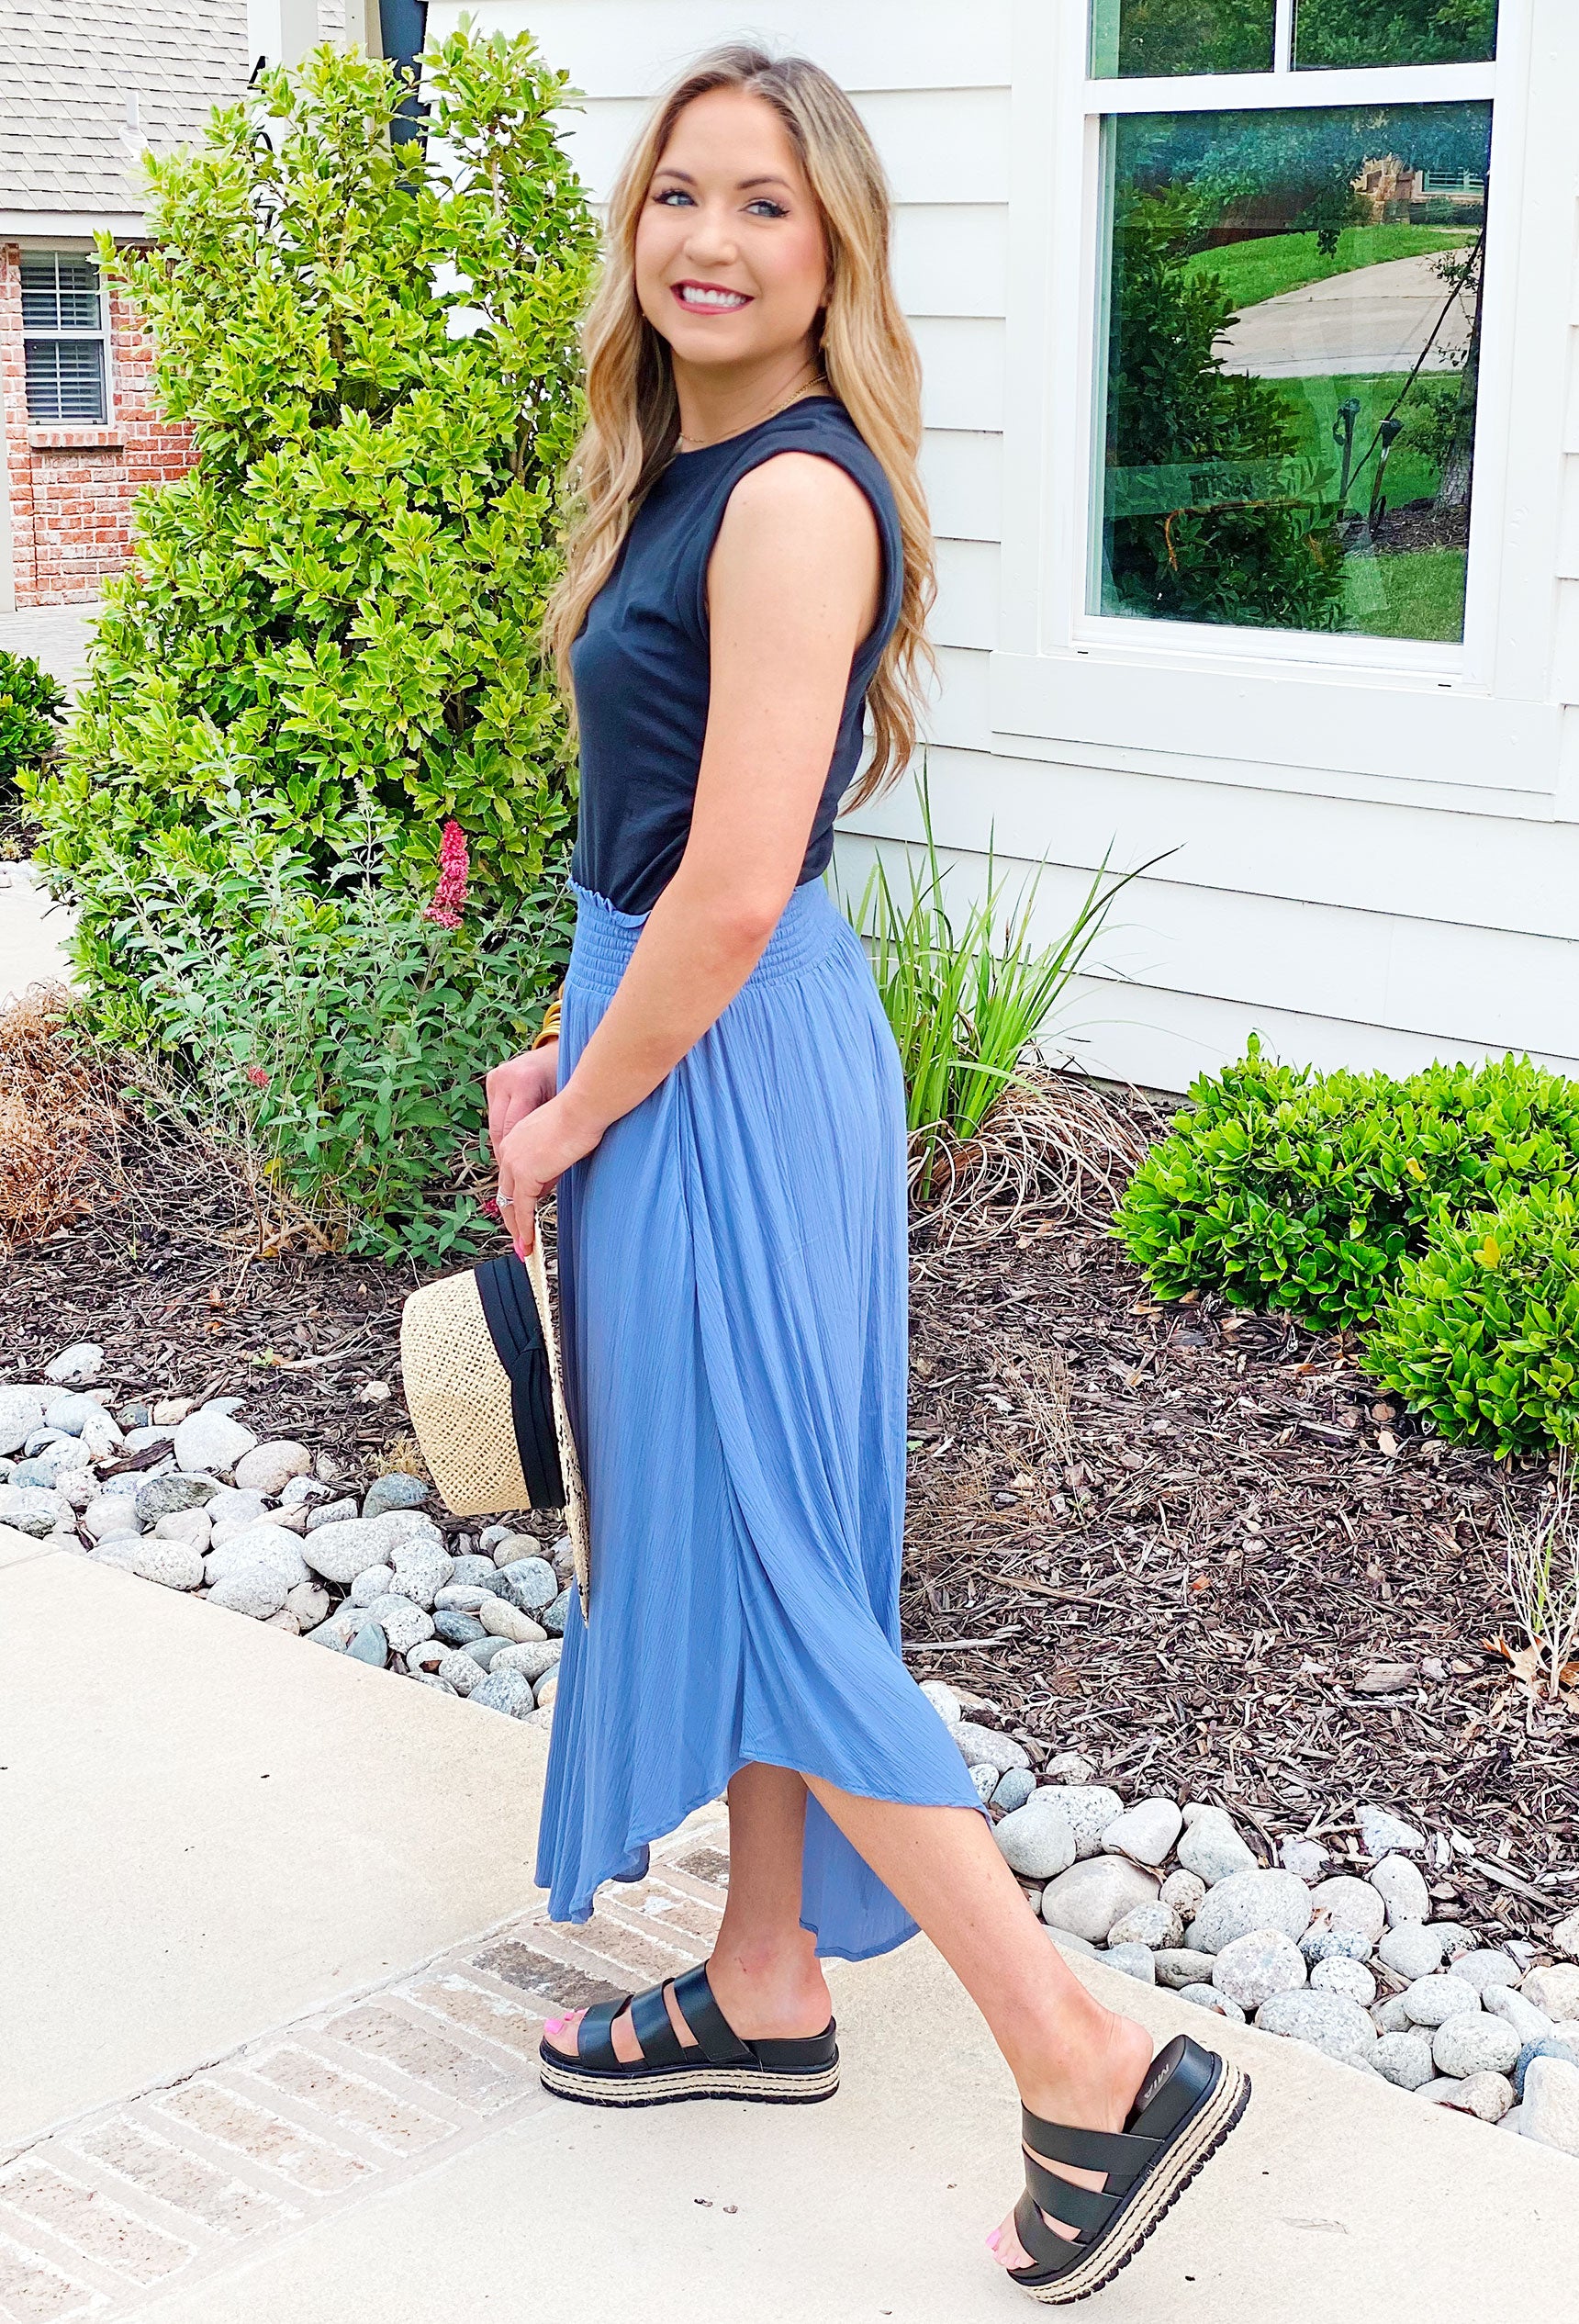 Tori Maxi Skirt in Azure, Blue maxi dress featuring a smocked waist and flowy fit